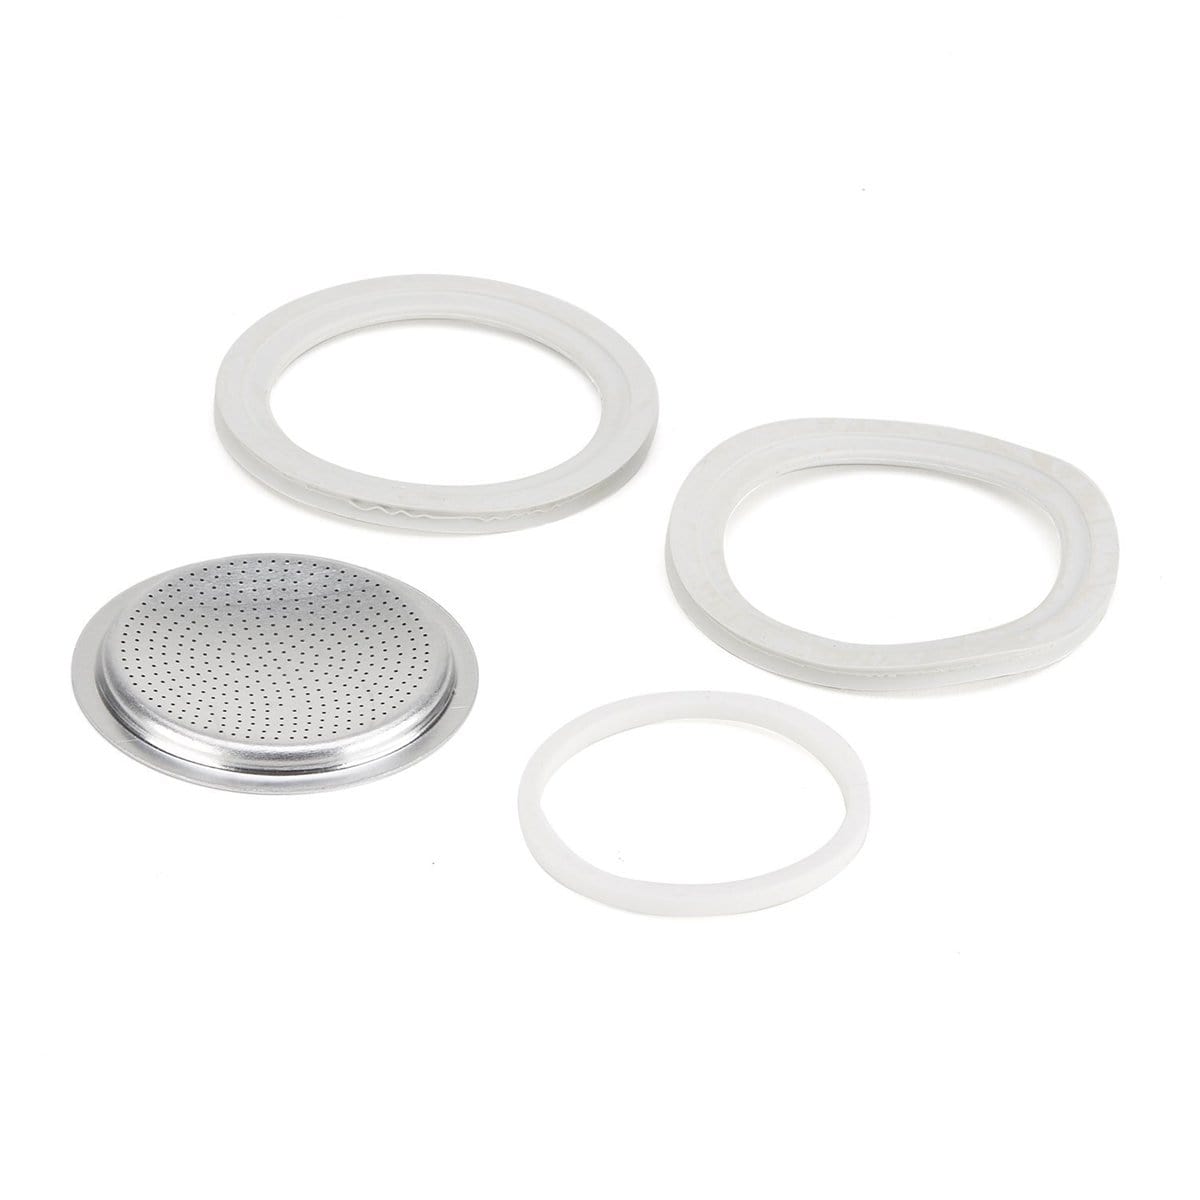 Bialetti Moka Express – 3 Cup Replacement Gasket/Filter